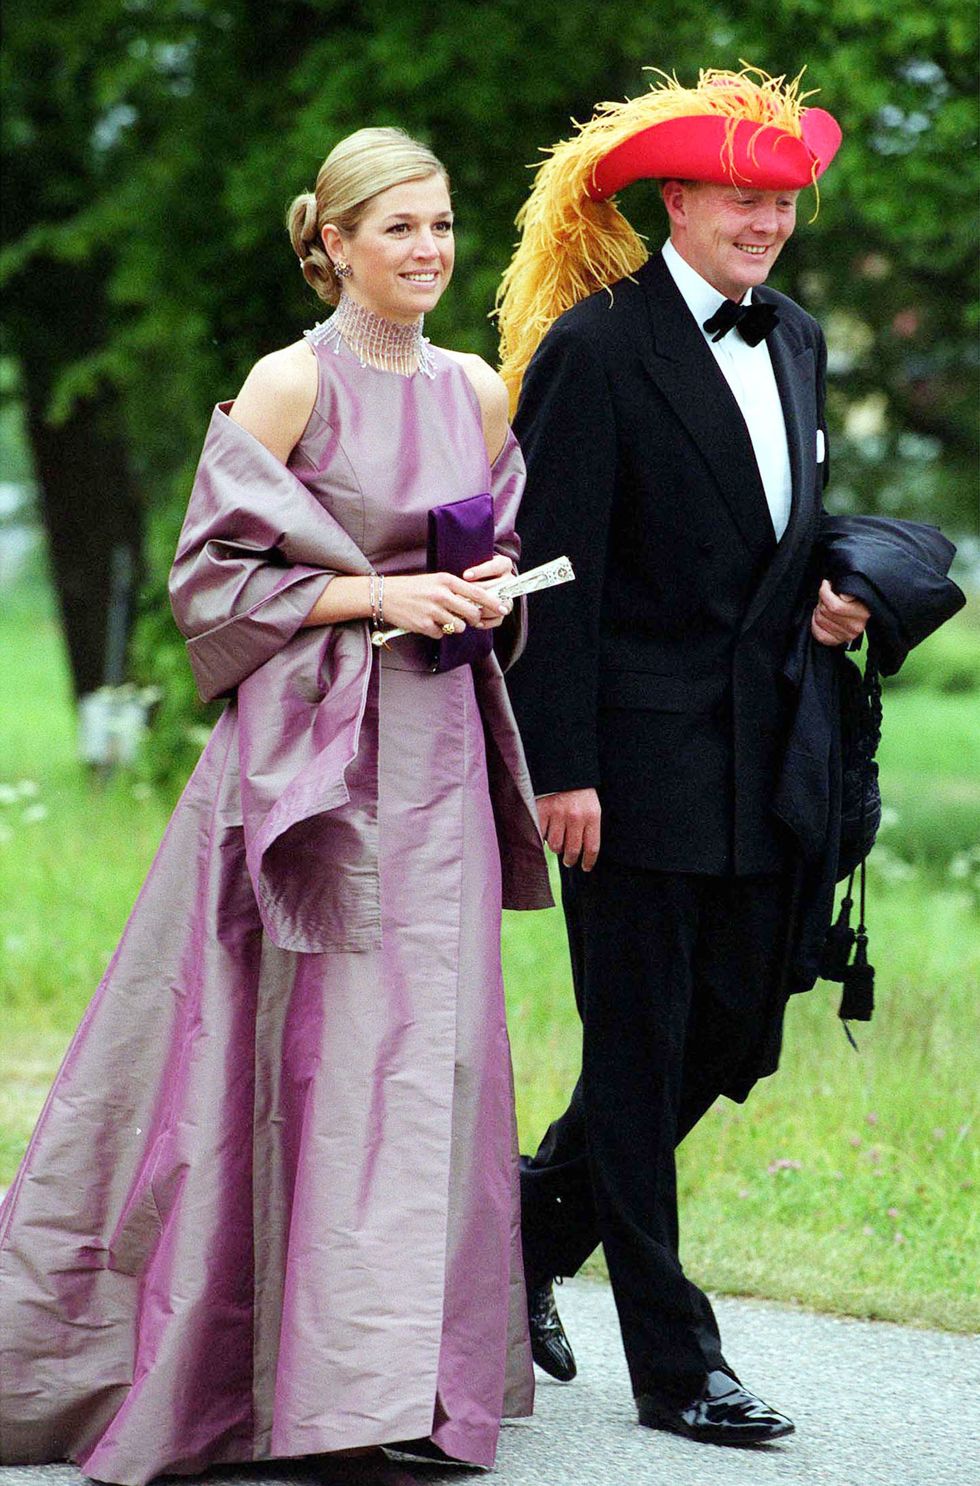 25th wedding anniversary of king and queen of sweden